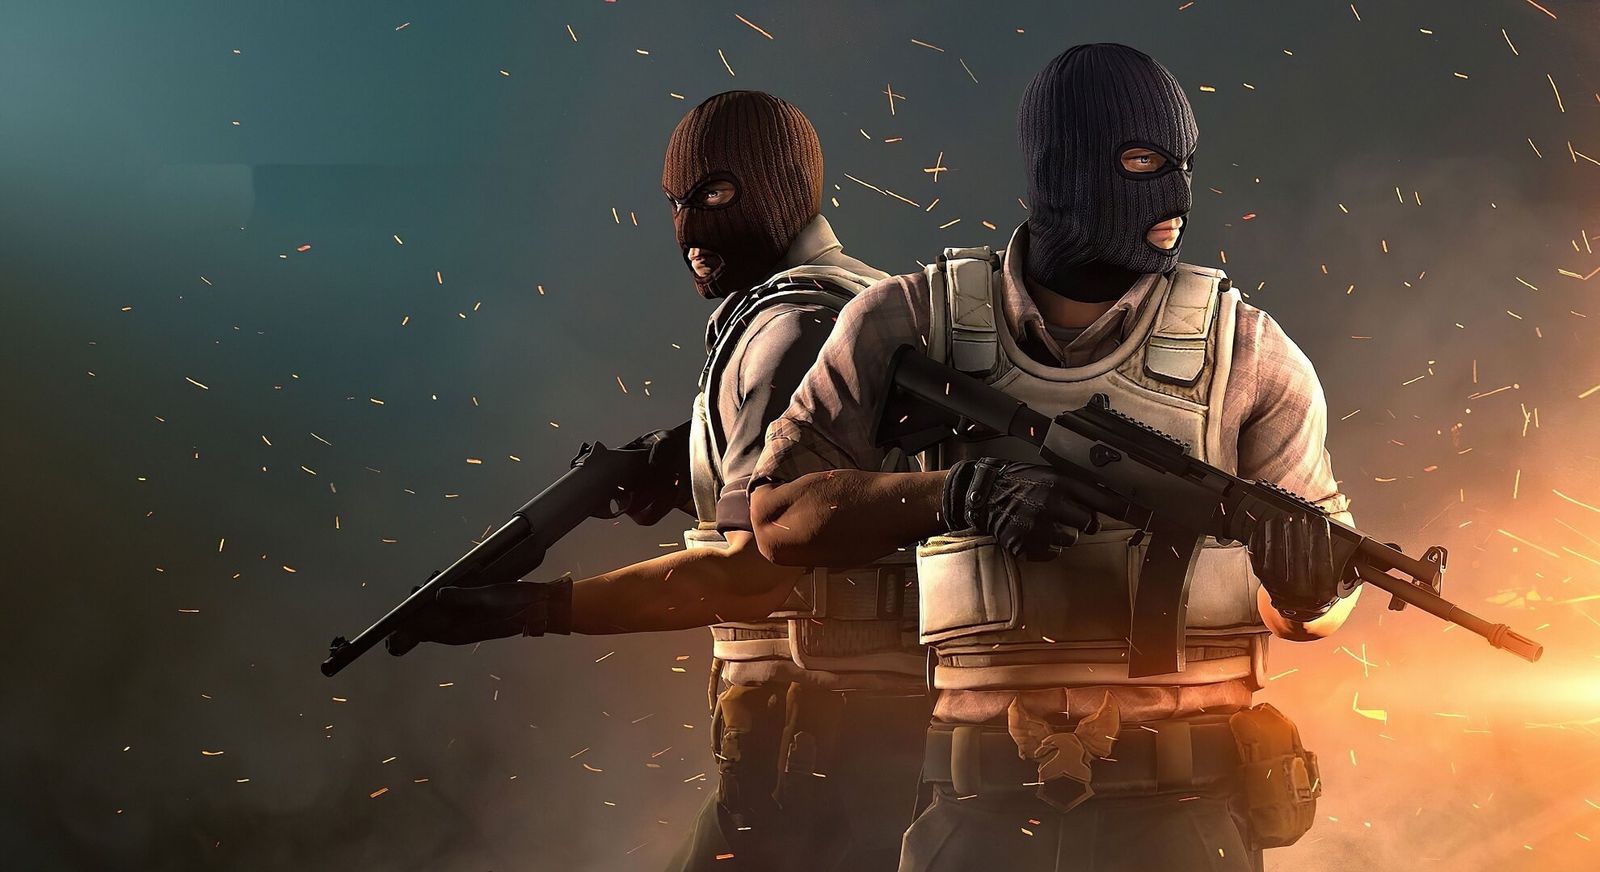 Counter Strike poster image featuring 2 characters with guns